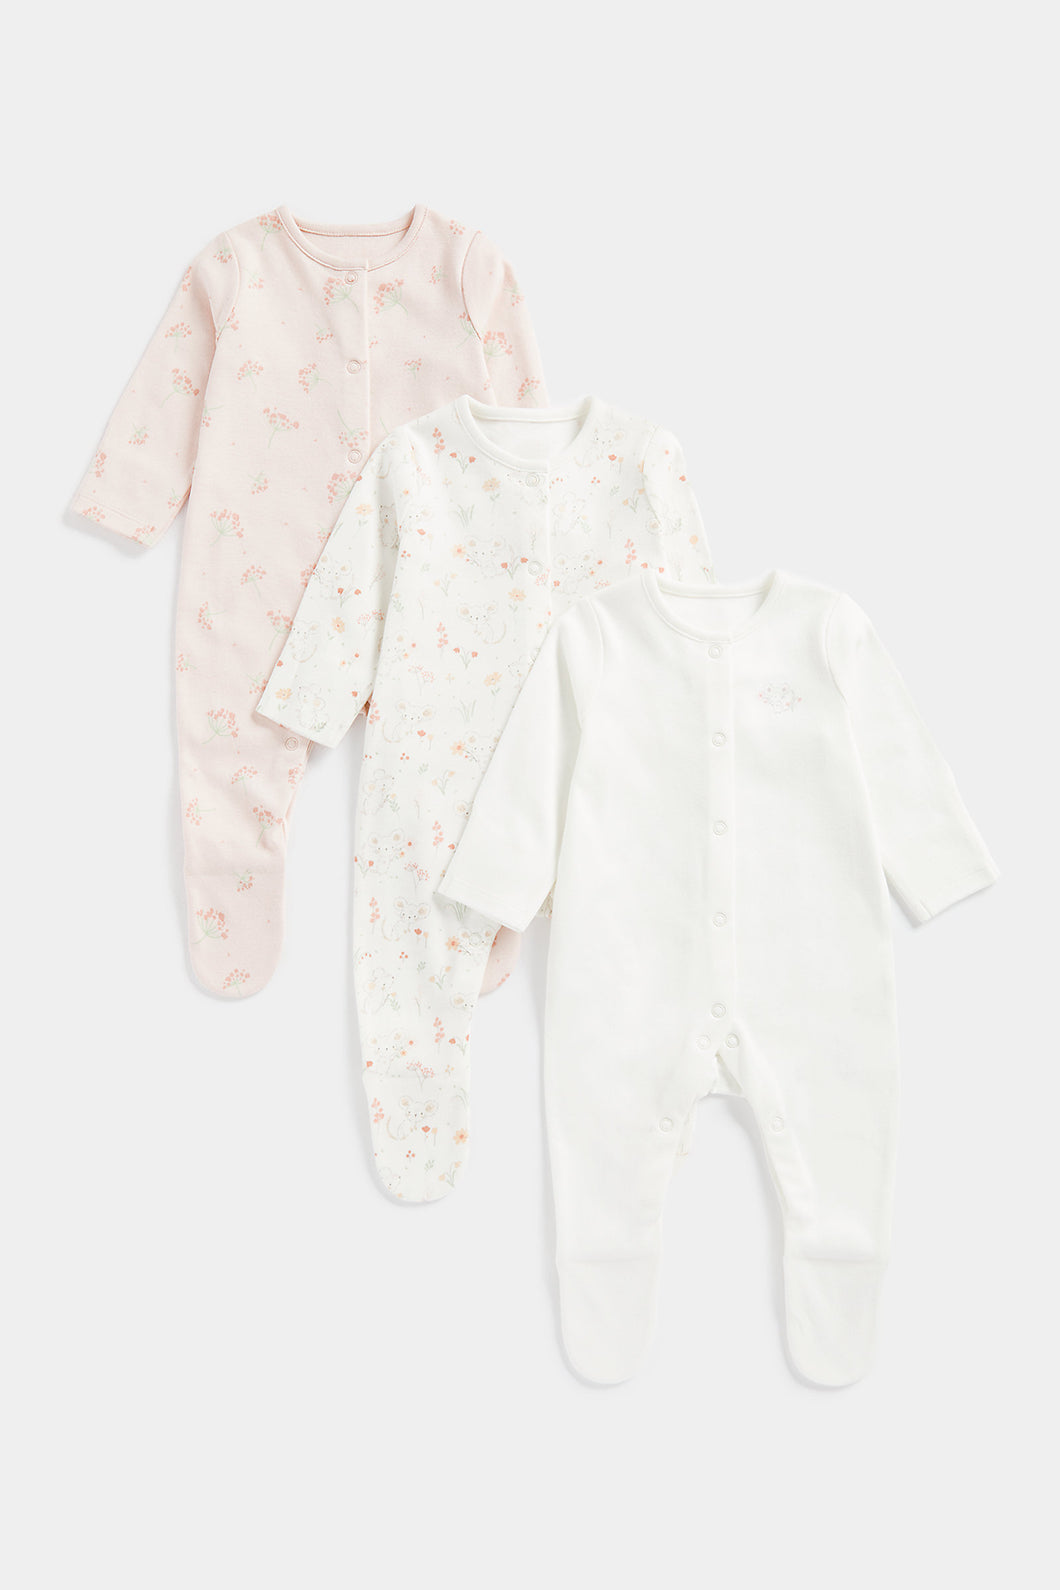 Mothercare My First Mouse Baby Sleepsuits - 3 Pack